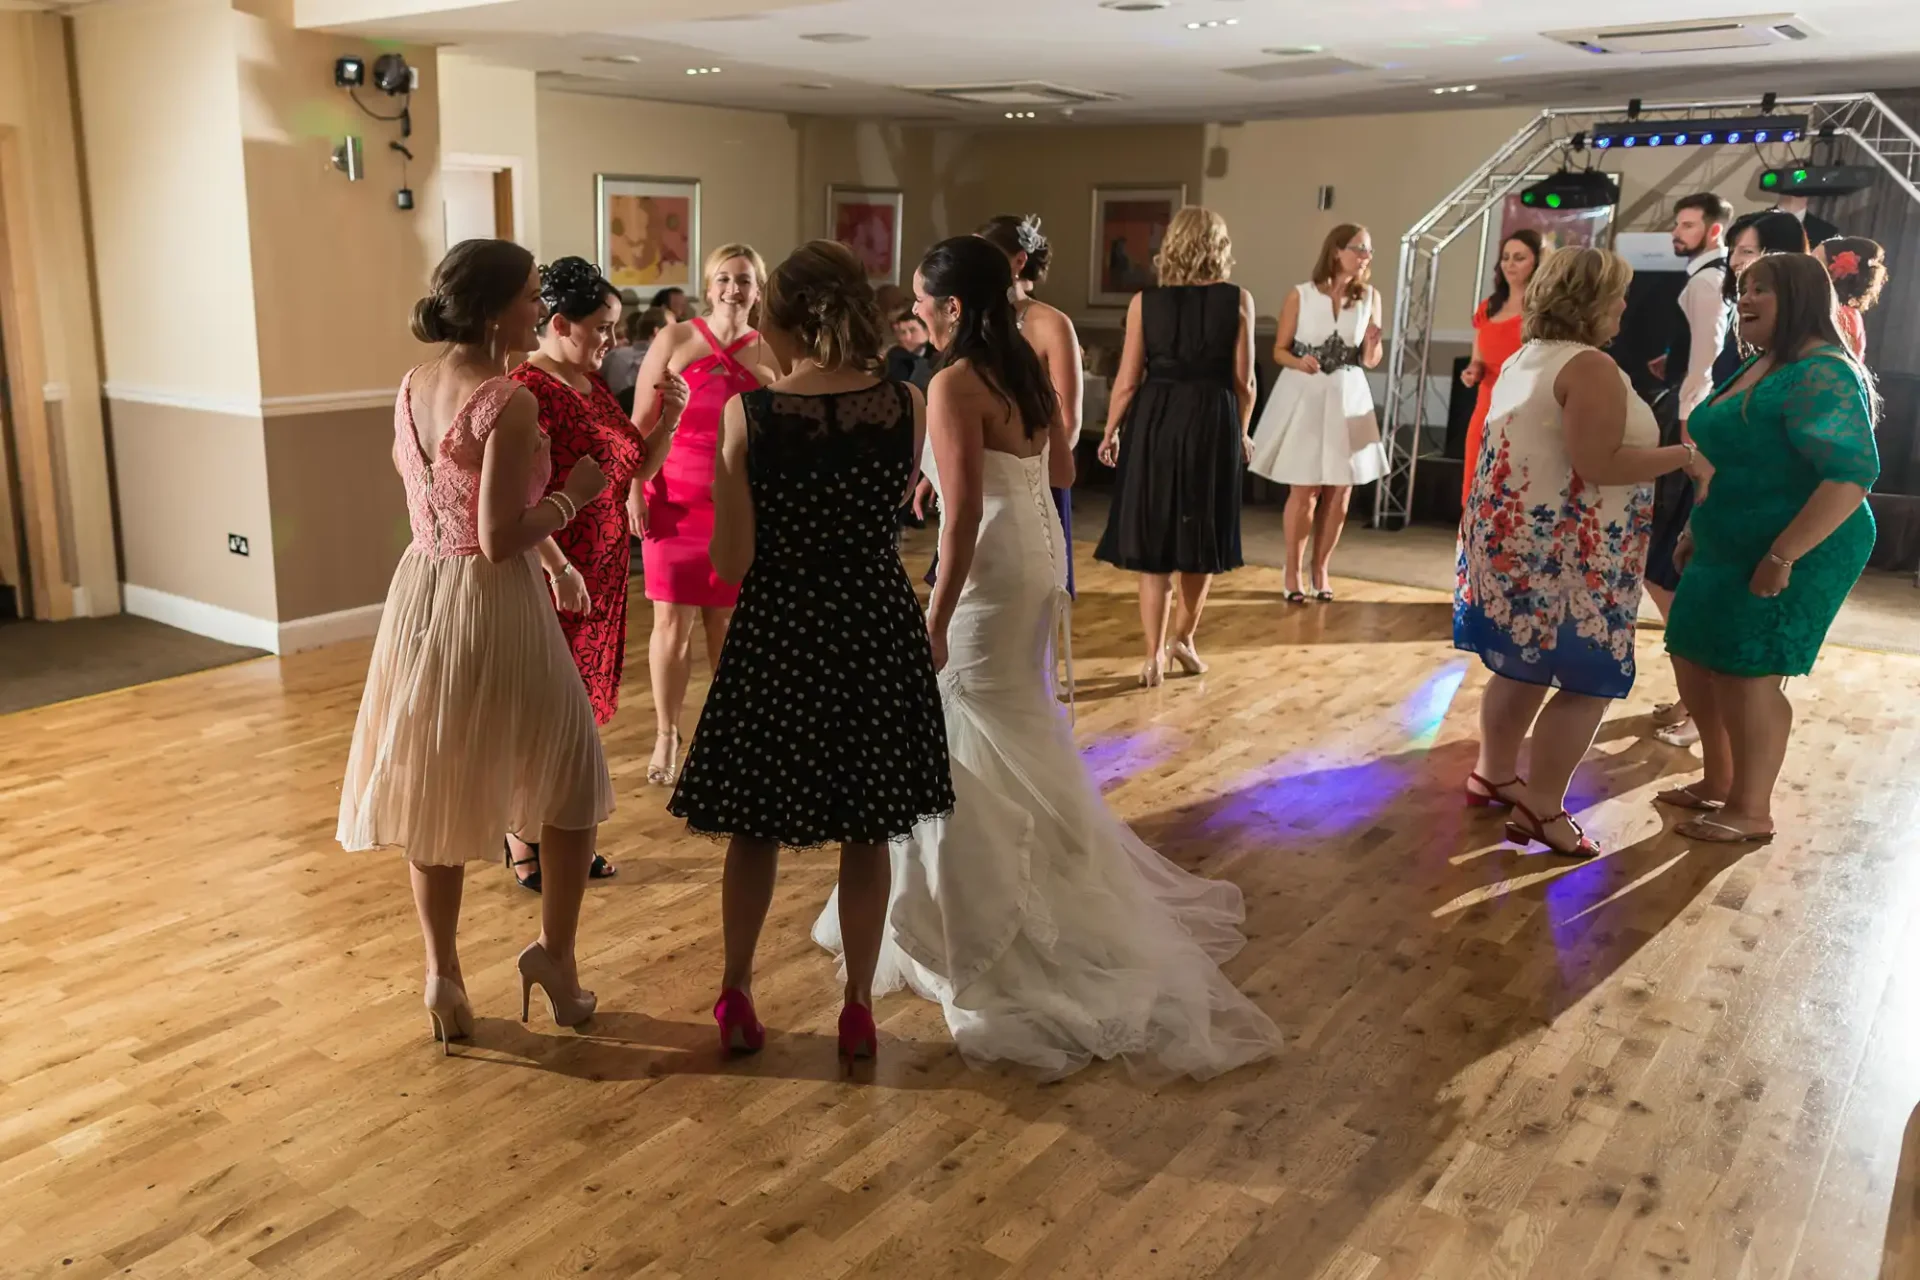 A group of women in dresses, including a bride, chatting and dancing at a wedding reception with other guests and a dj in the background.